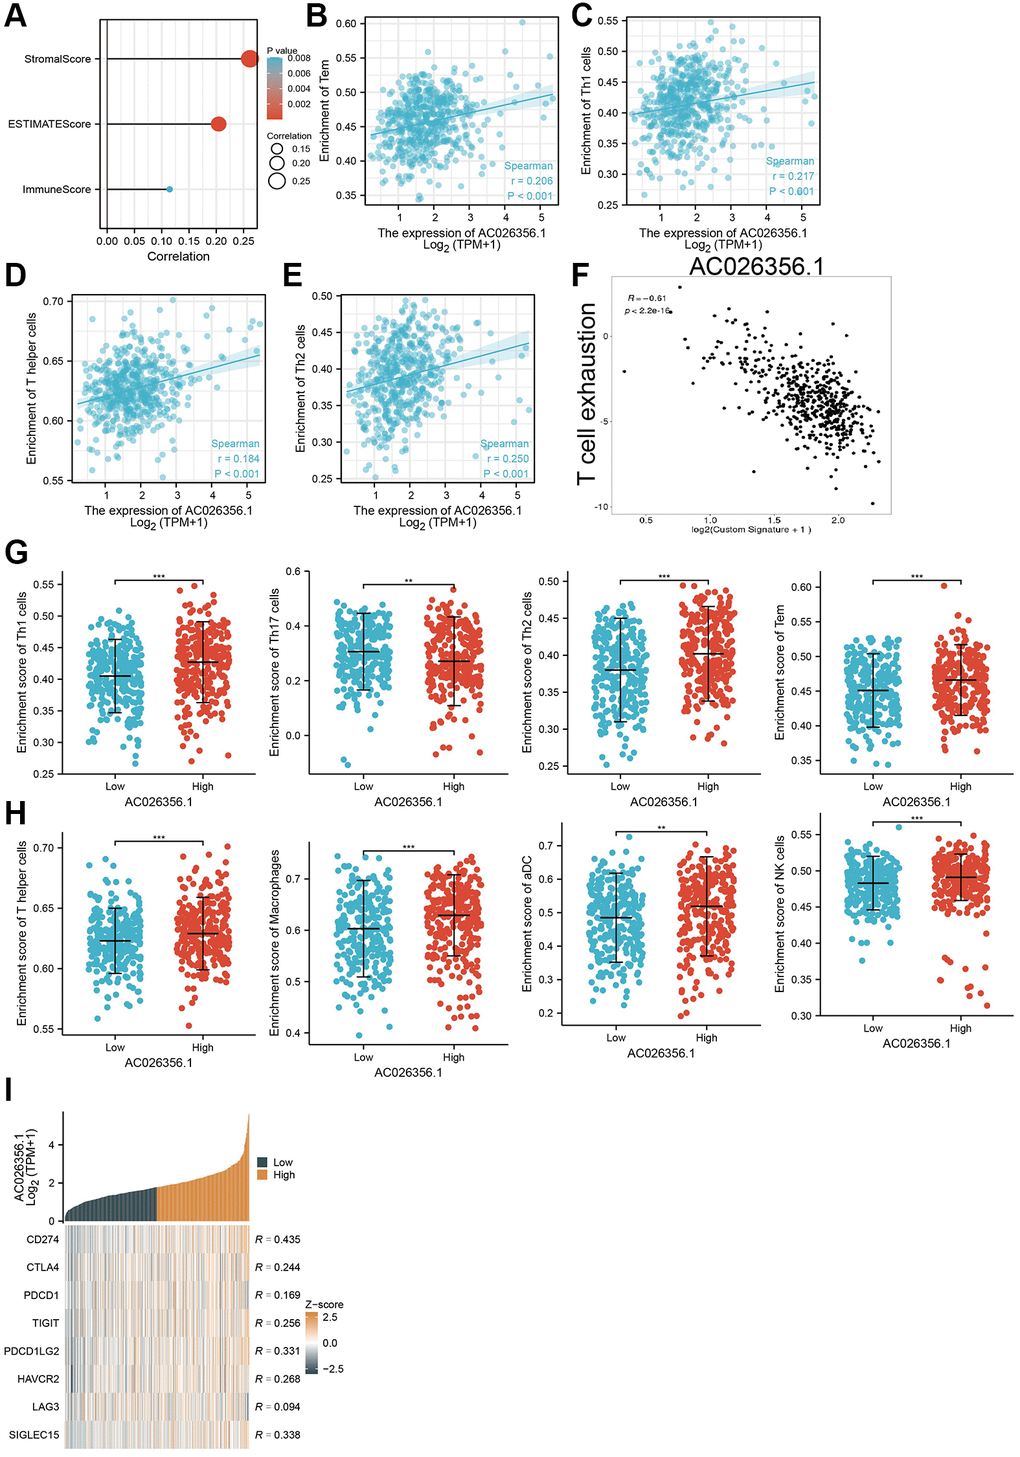 Correlation between AC026356.1 expression and immune infiltrates. (A) AC026356.1 expression was positively correlated with LUAD immune scores, stromal scores, and ESTIMATE scores. (B–E) Correlation between AC026356.1 expression and diverse immune infiltrates in LUAD. (F) Correlation between AC026356.1 expression and T cell exhaustion (G, H) The abundance of immune infiltrates of diverse immune cells based on the AC026356.1 high or low expression group. (I) Correlation between AC026356.1 expression and diverse immune checkpoint gene in LUAD. **p ***p 